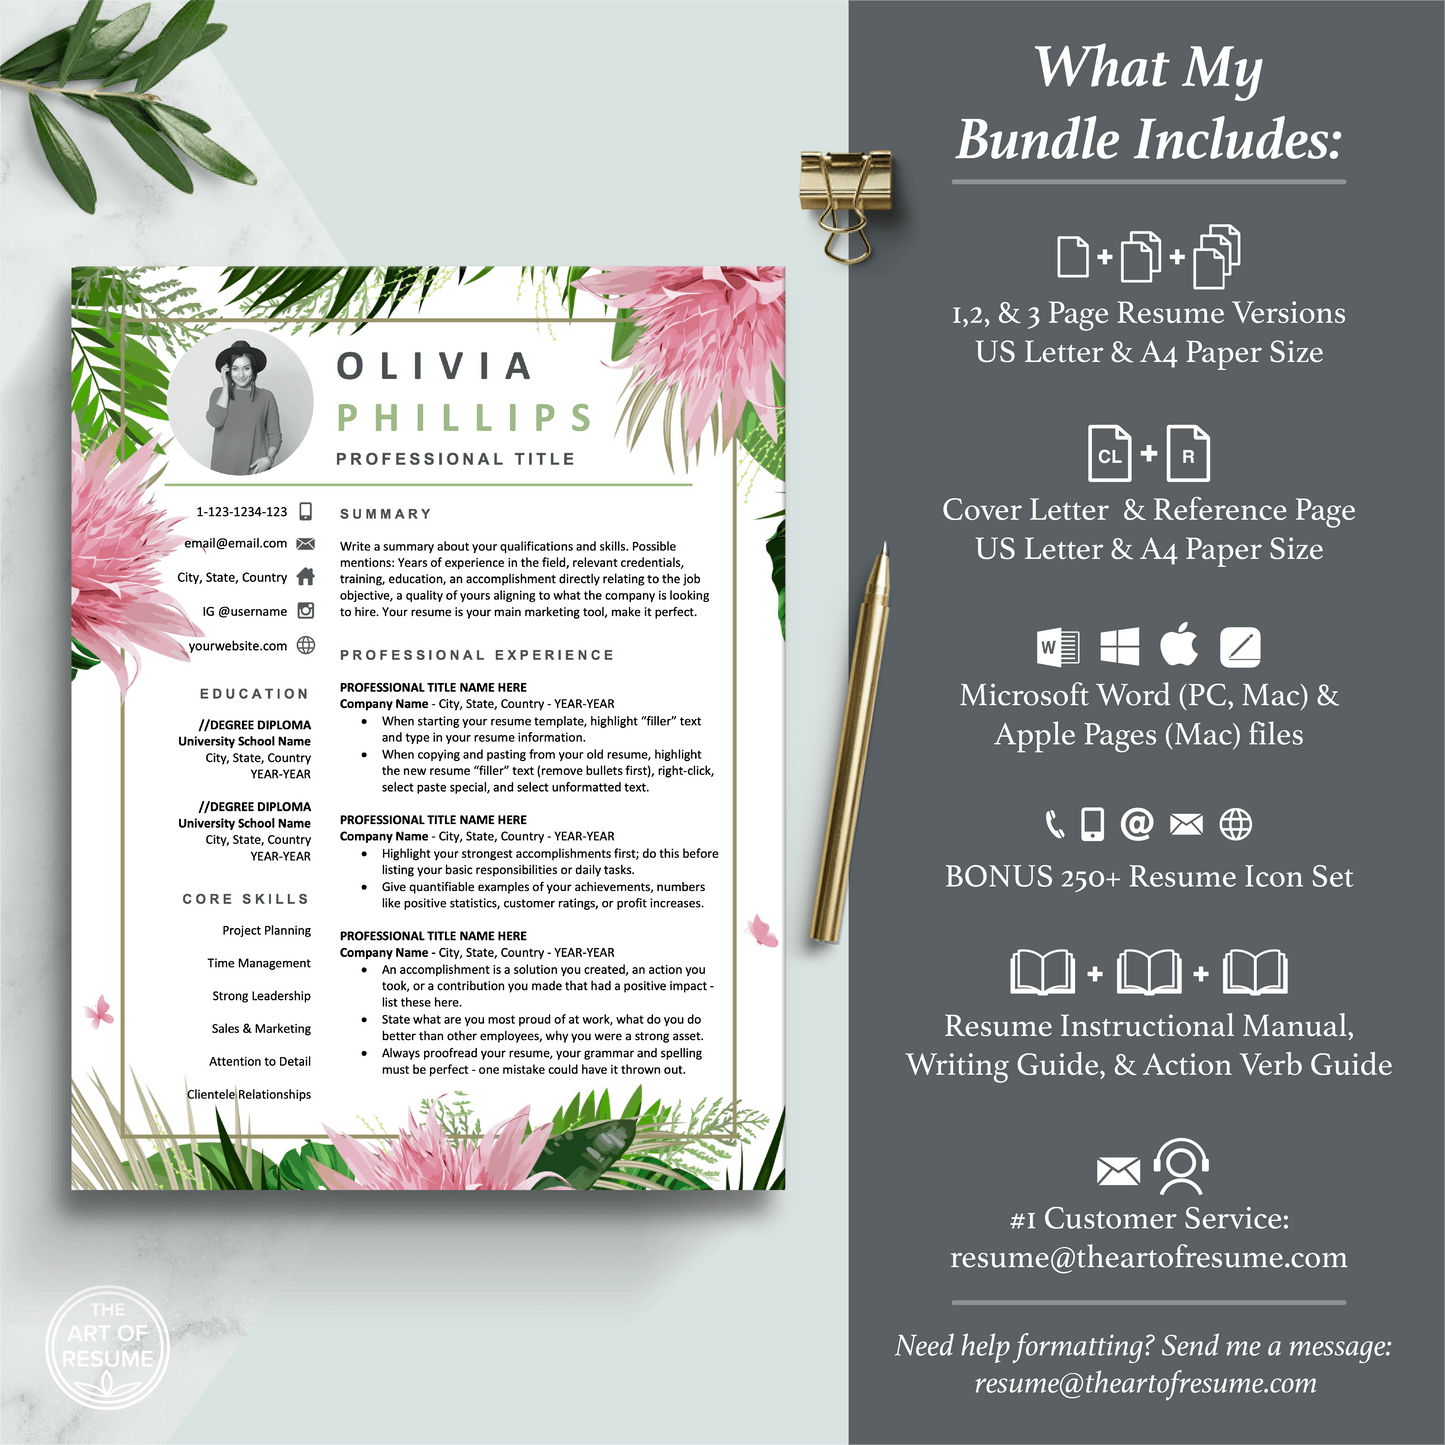 The Art of Resume Templates |  Creative Pink Floral Resume CV Template Includes 3 Editable Resume Templates, Cover Letter, Reference Page, Mac, PC, A4 Paper, US size, Free Guide, The Art of Resume Writing, 250 Bonus Resume Icons